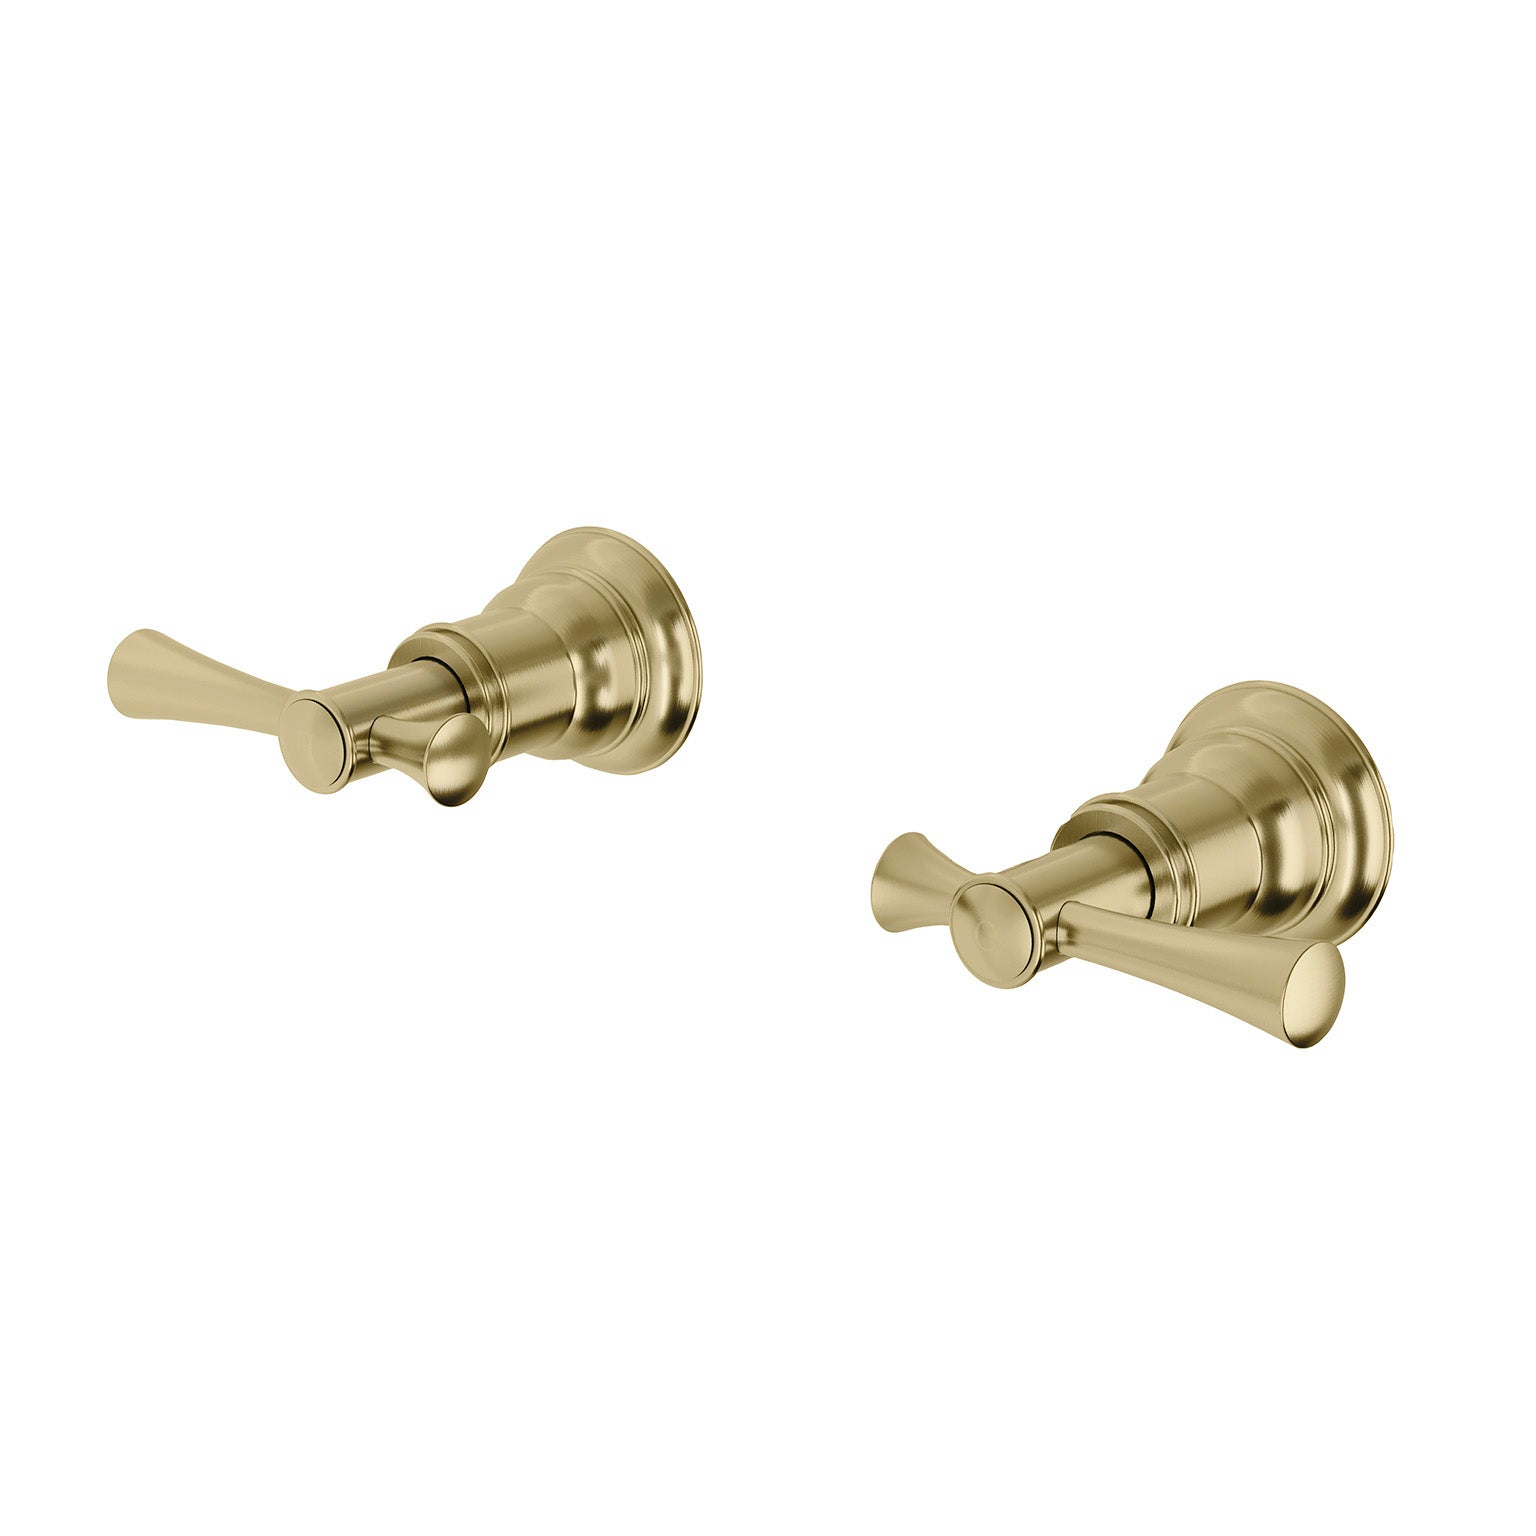 PHOENIX CROMFORD WALL TOP ASSEMBLIES 15MM EXTENDED SPINDLES BRUSHED GOLD